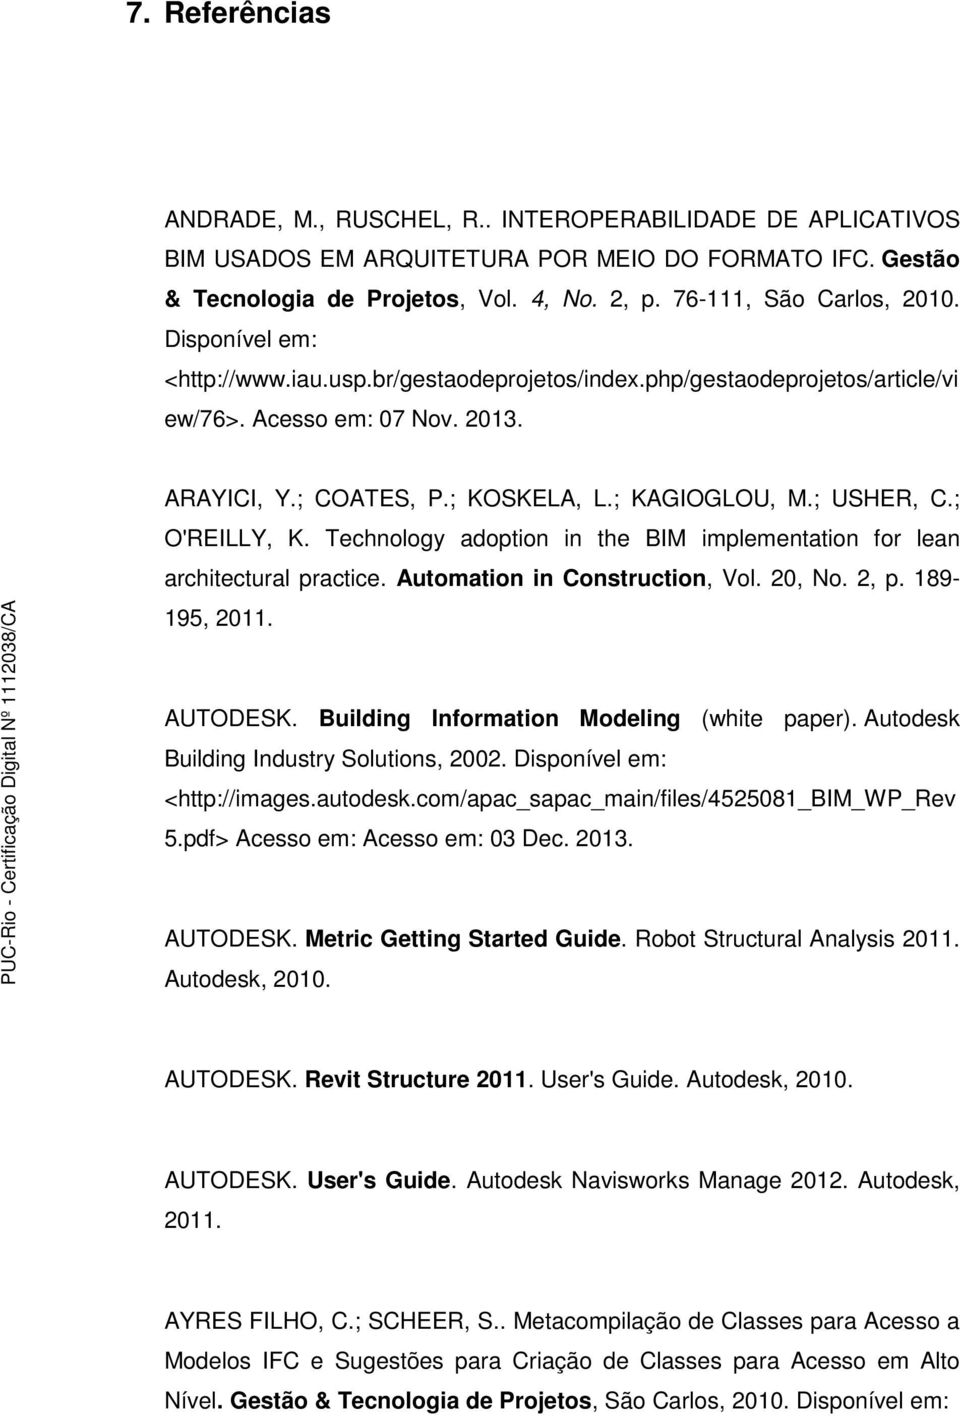 ; KAGIOGLOU, M.; USHER, C.; O'REILLY, K. Technology adoption in the BIM implementation for lean architectural practice. Automation in Construction, Vol. 20, No. 2, p. 189-195, 2011. AUTODESK.